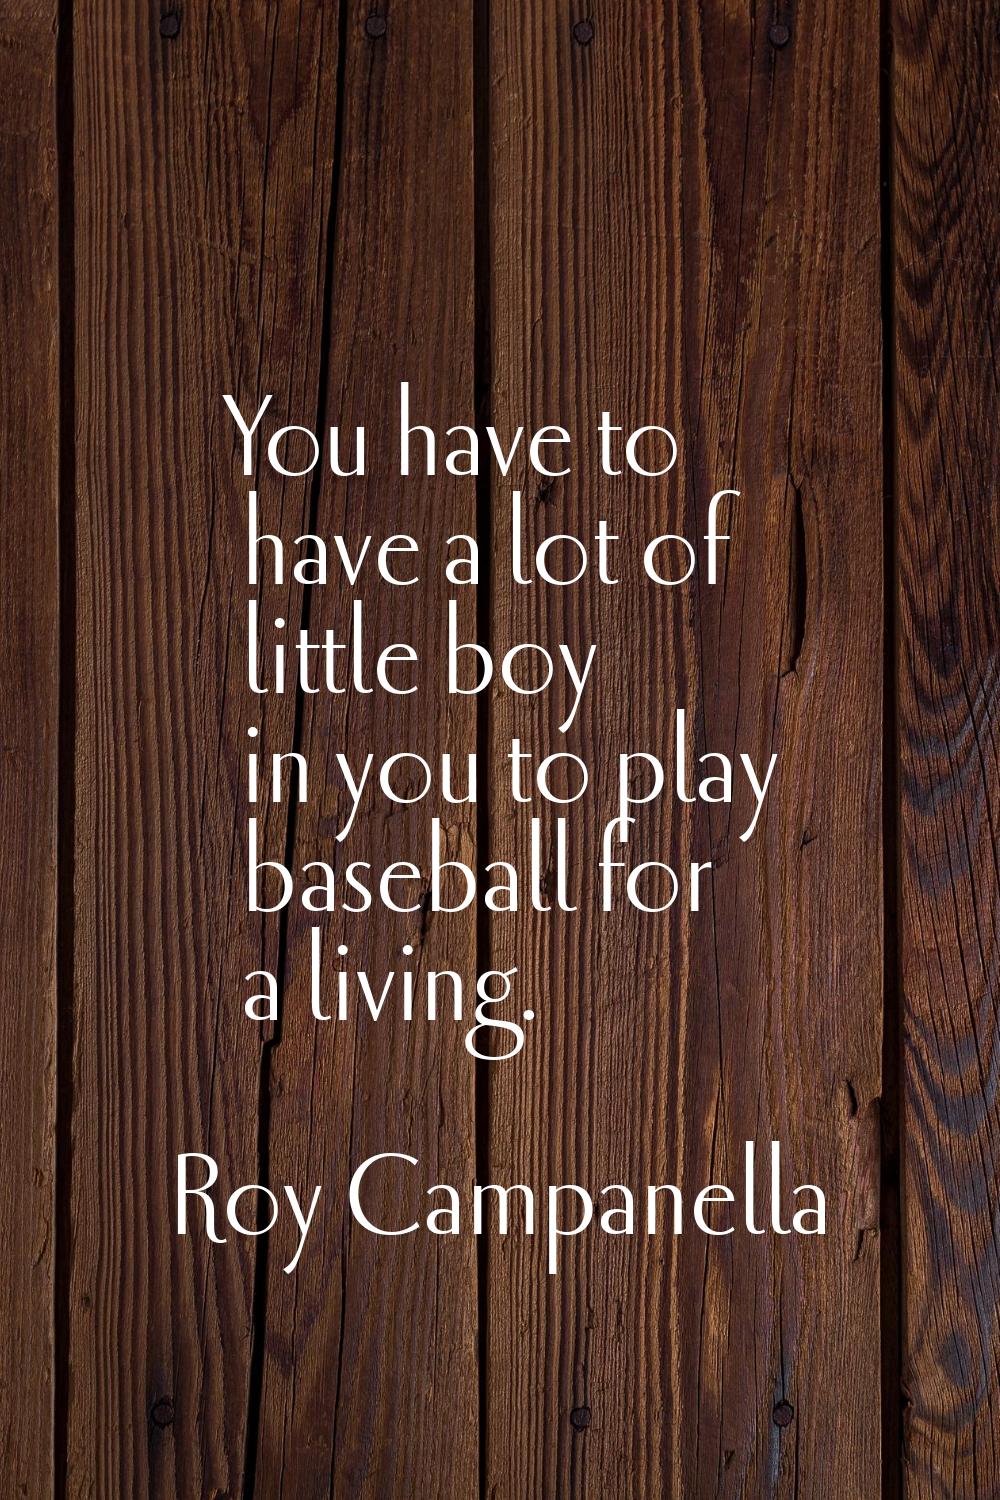 You have to have a lot of little boy in you to play baseball for a living.